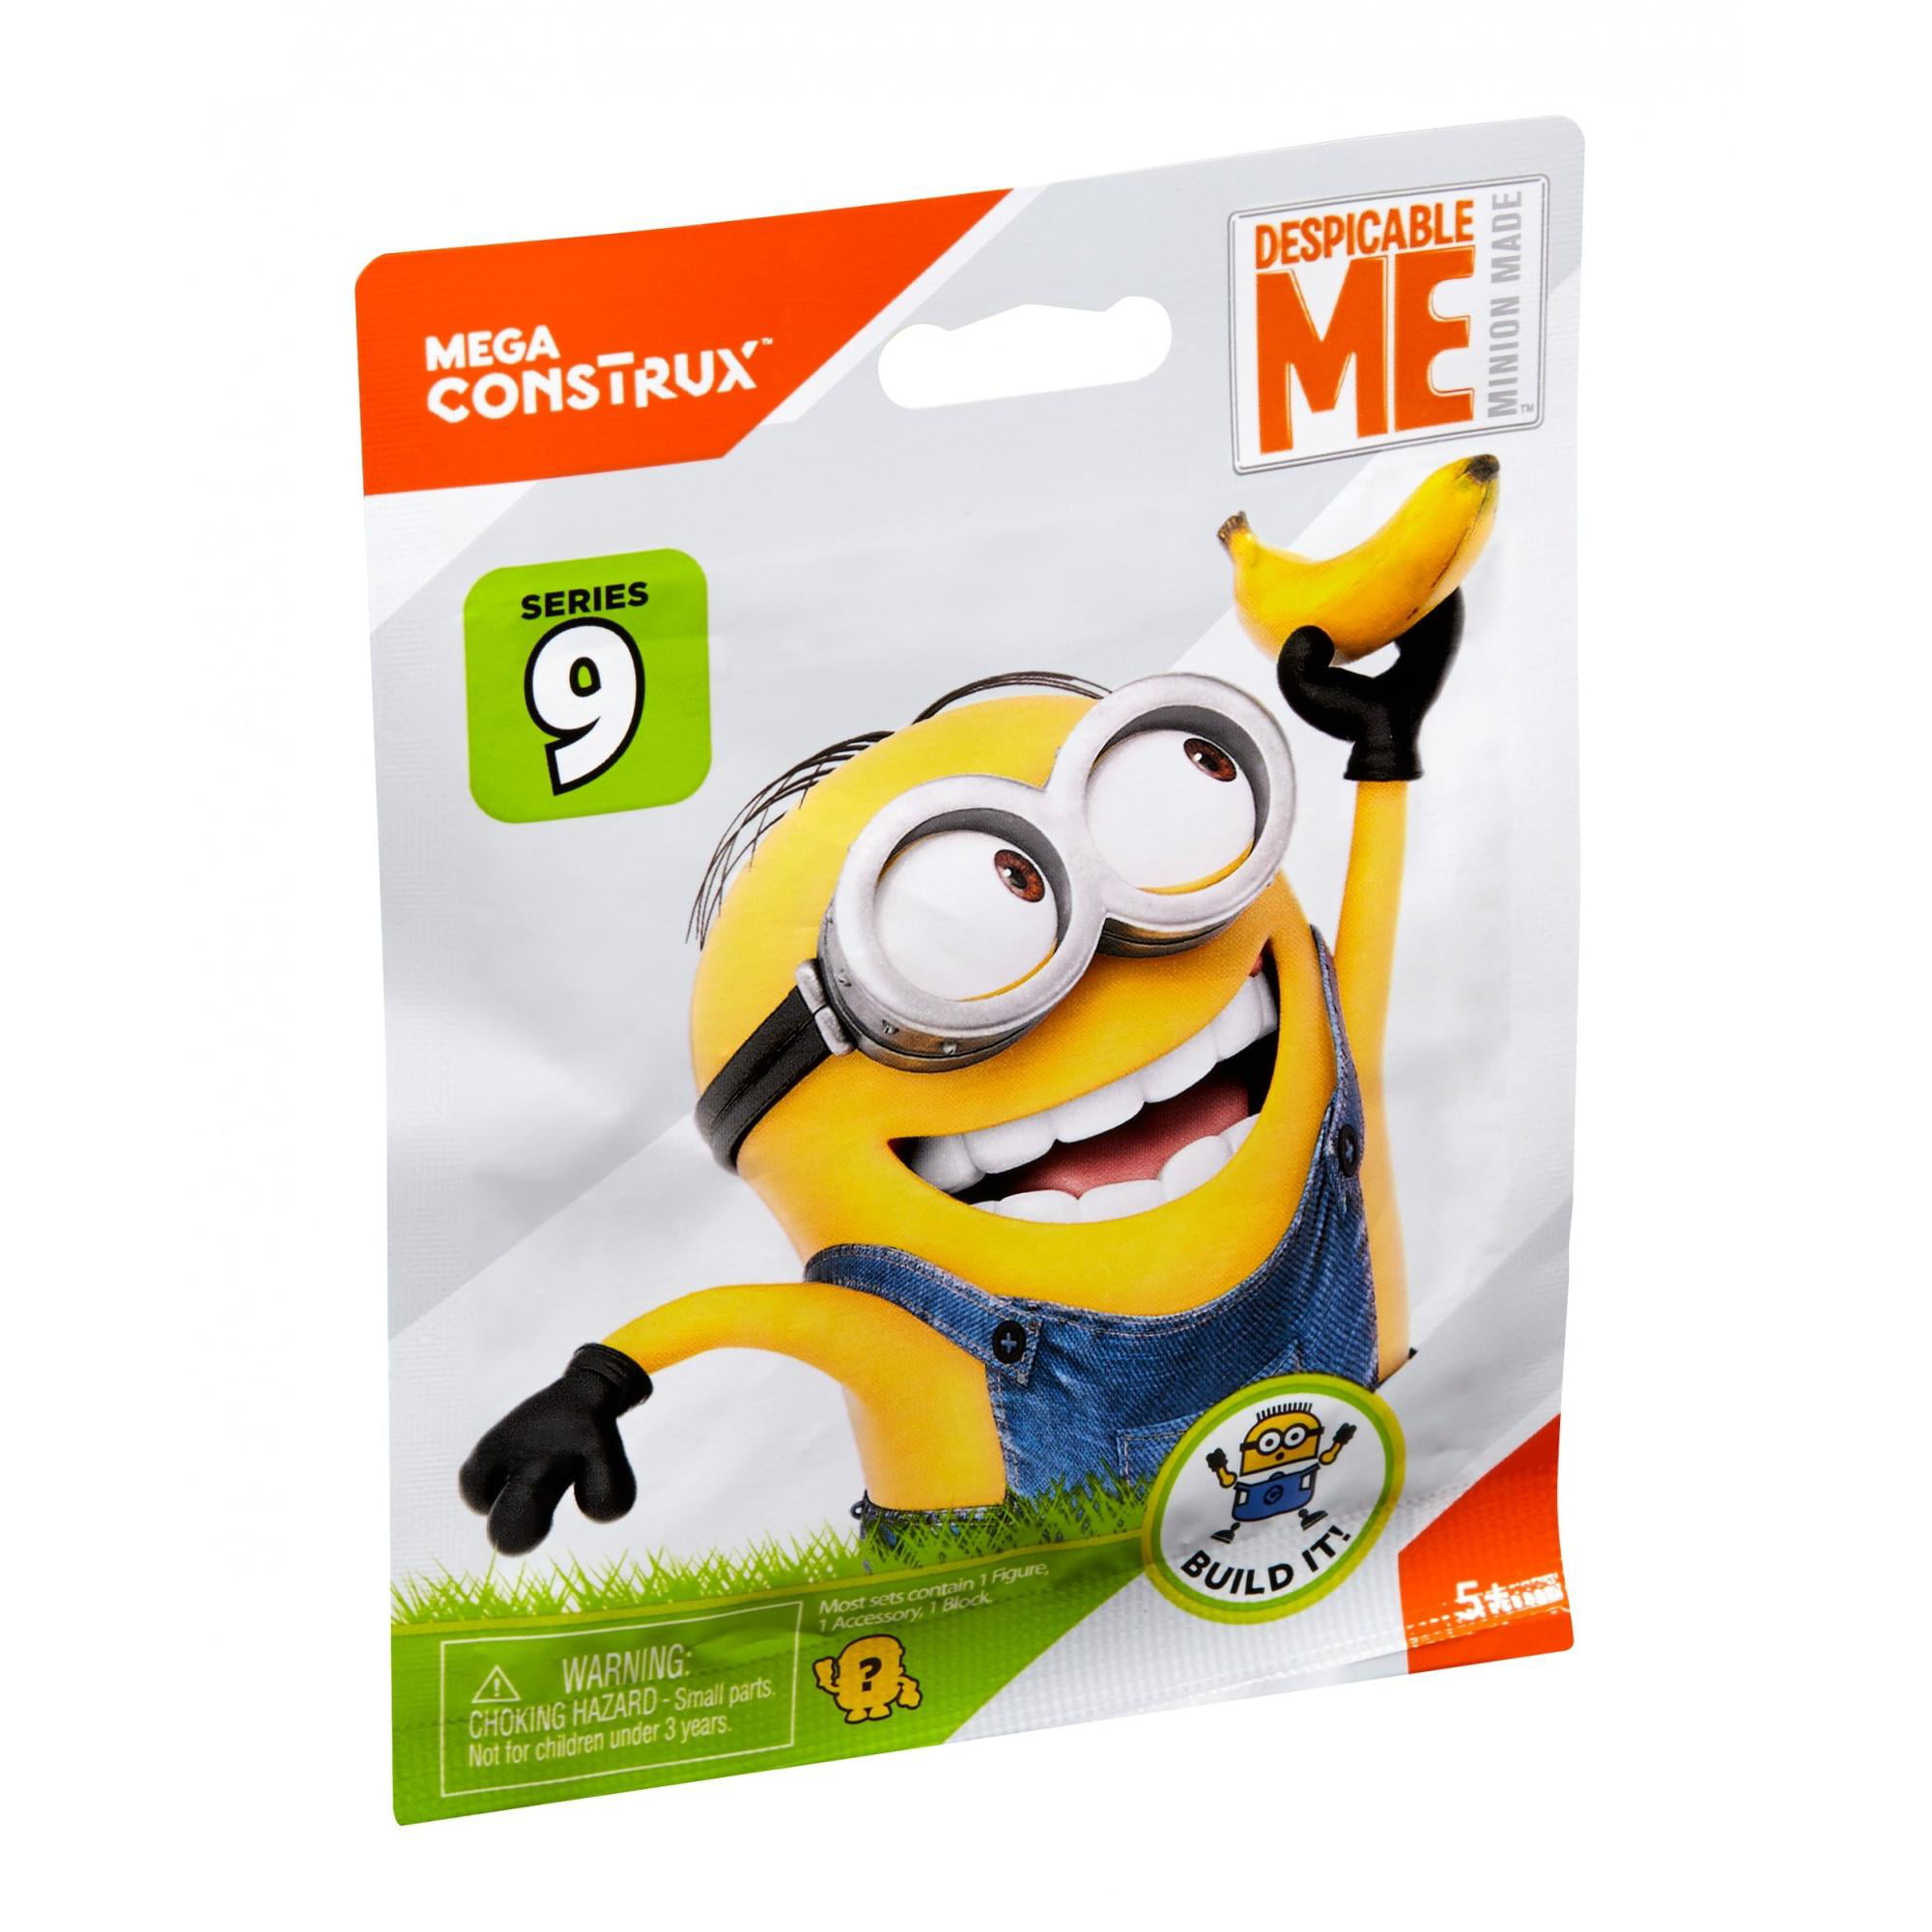 Minion sketching Series 9 New and sealed in bag. Mega Construx Despicable Me 